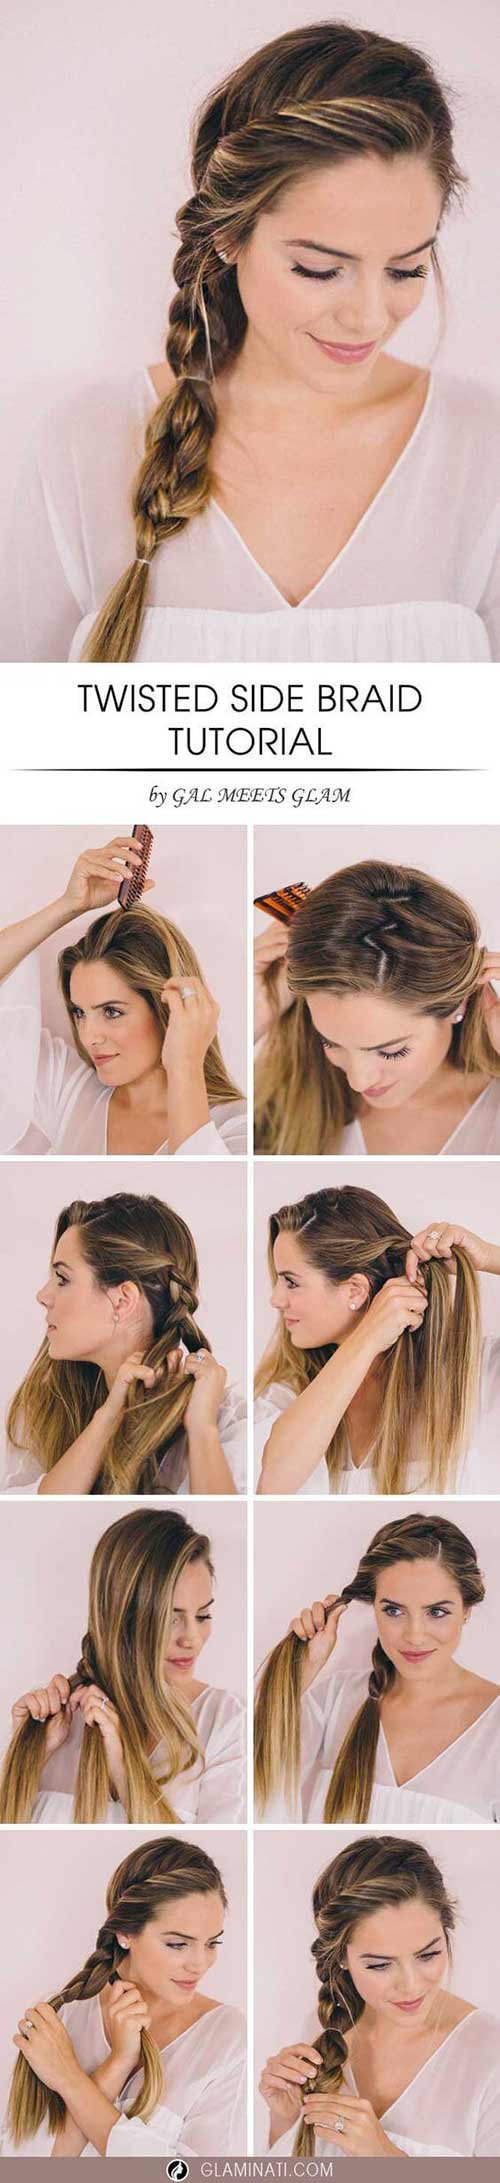 Twisted side braid hairstyle tutorial for girls with long hair